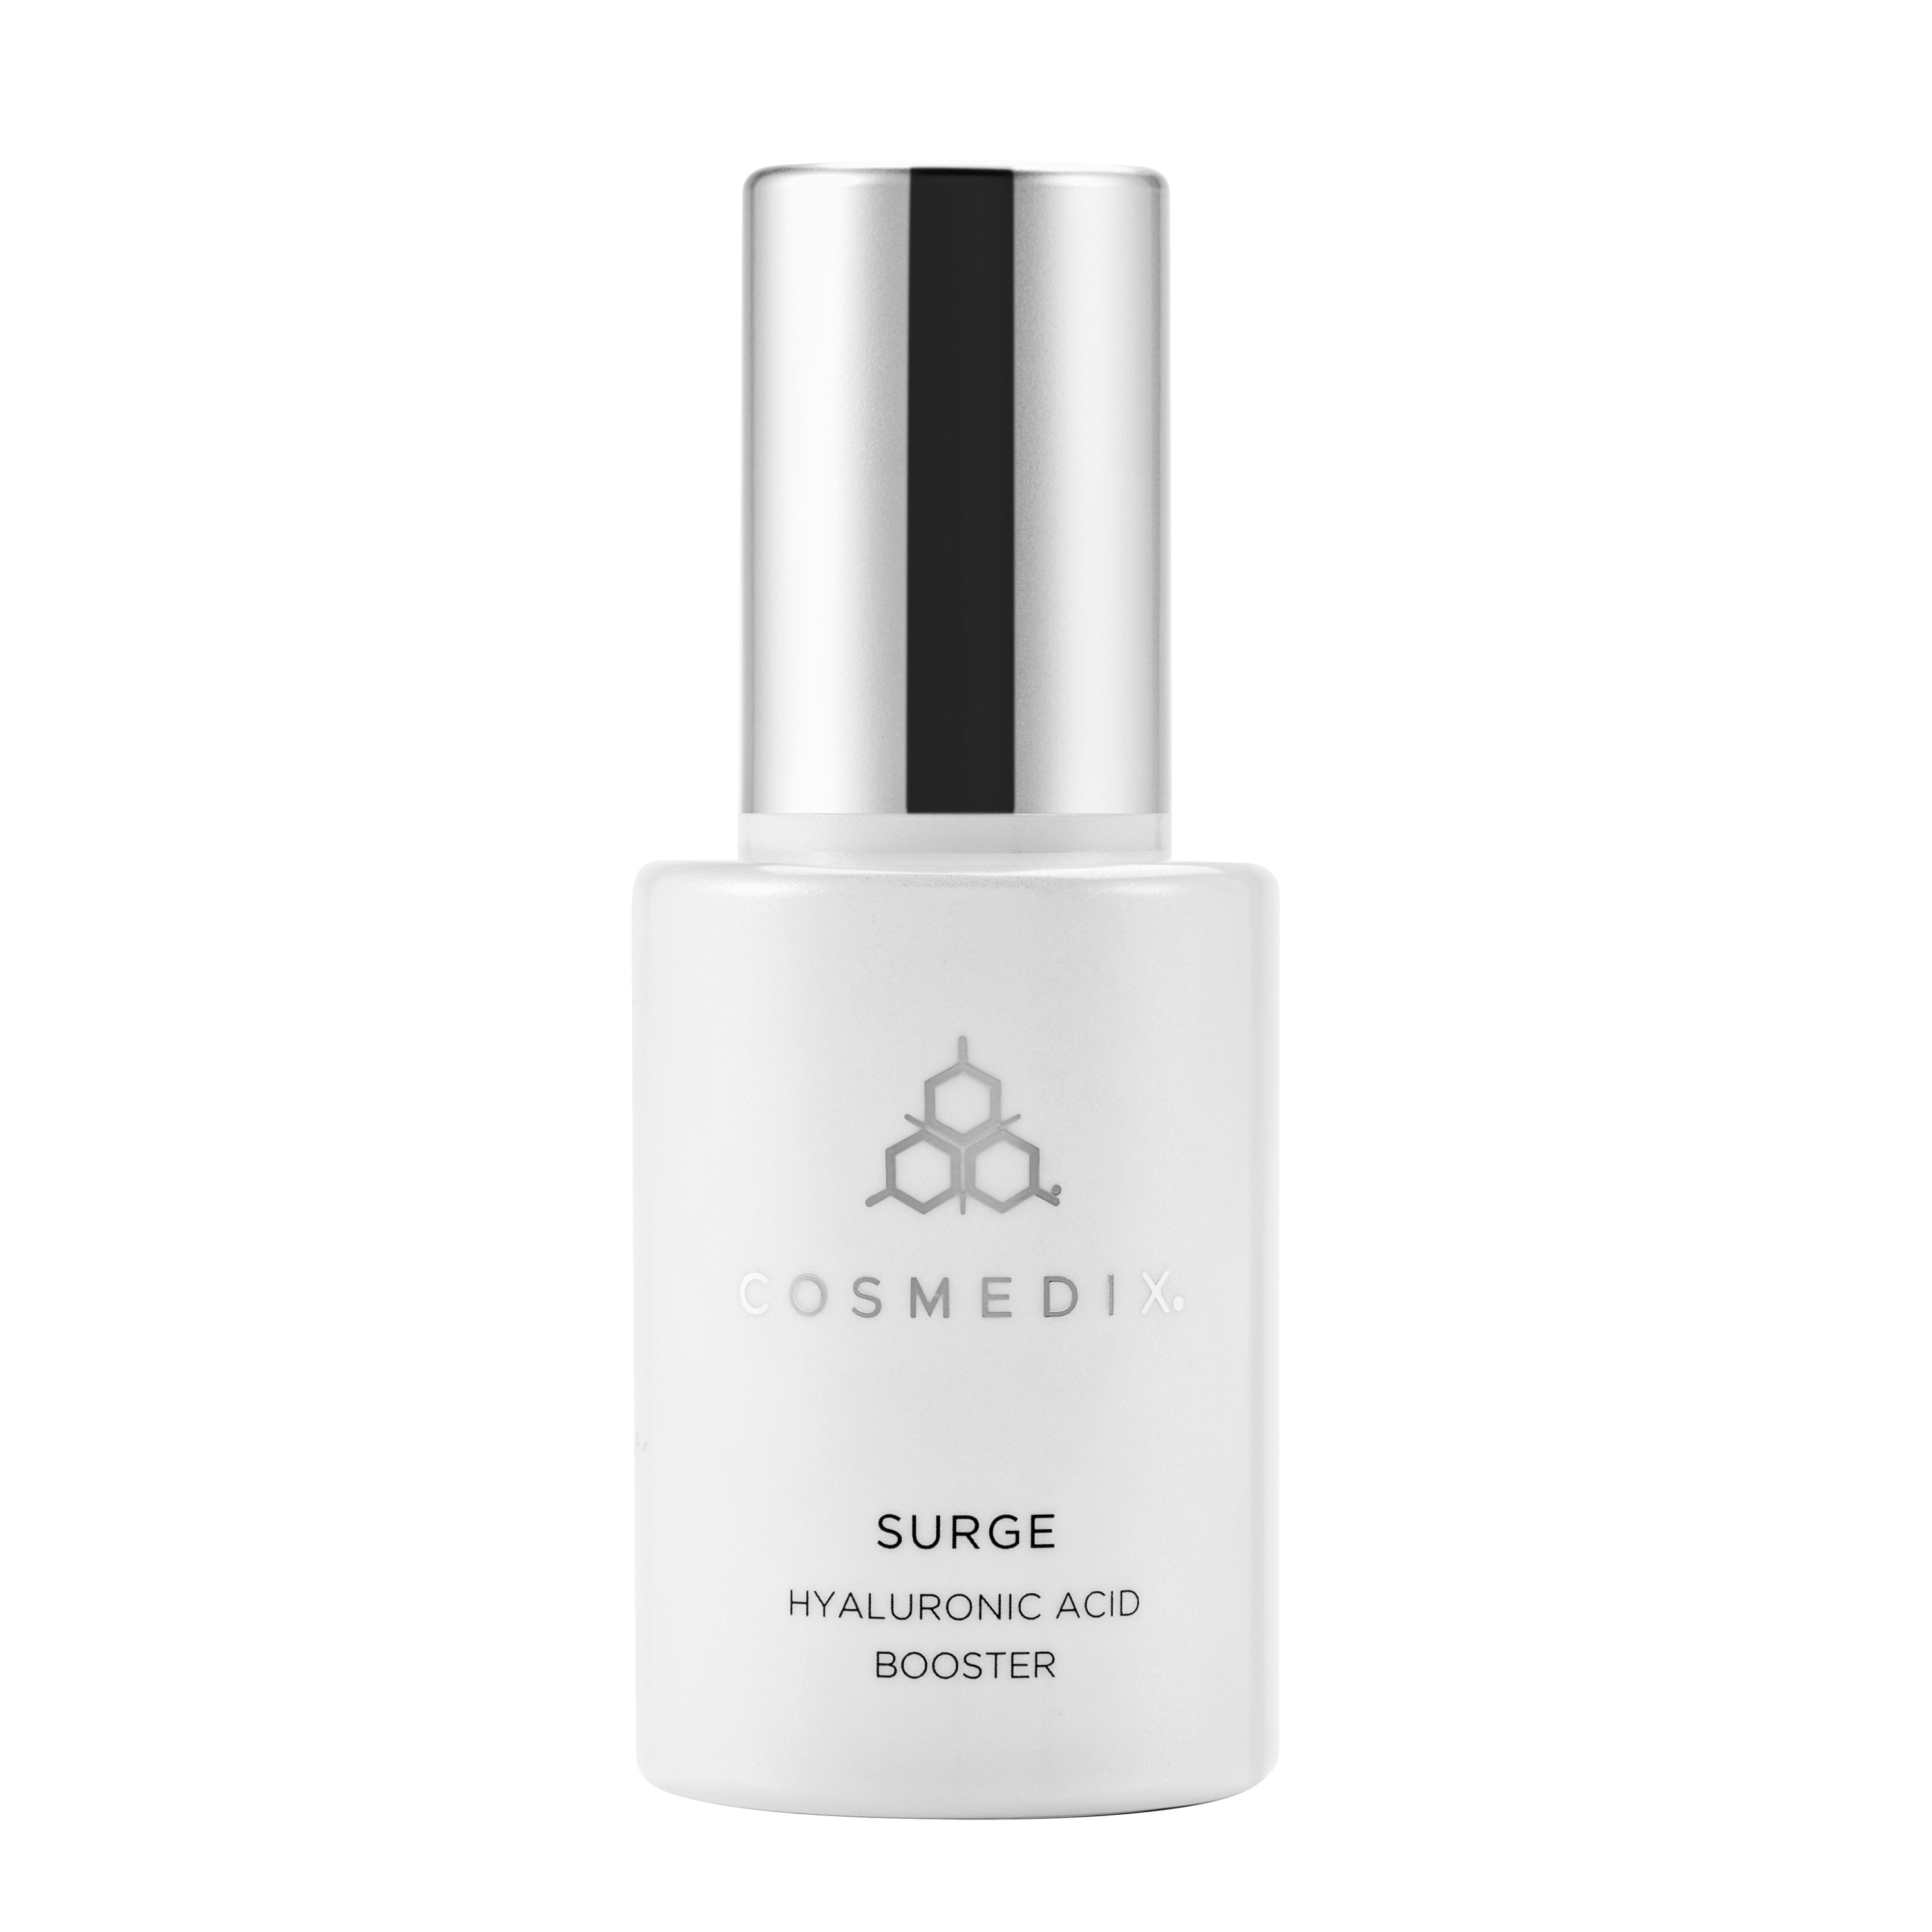 Surge - Hyaluronic Acid Booster